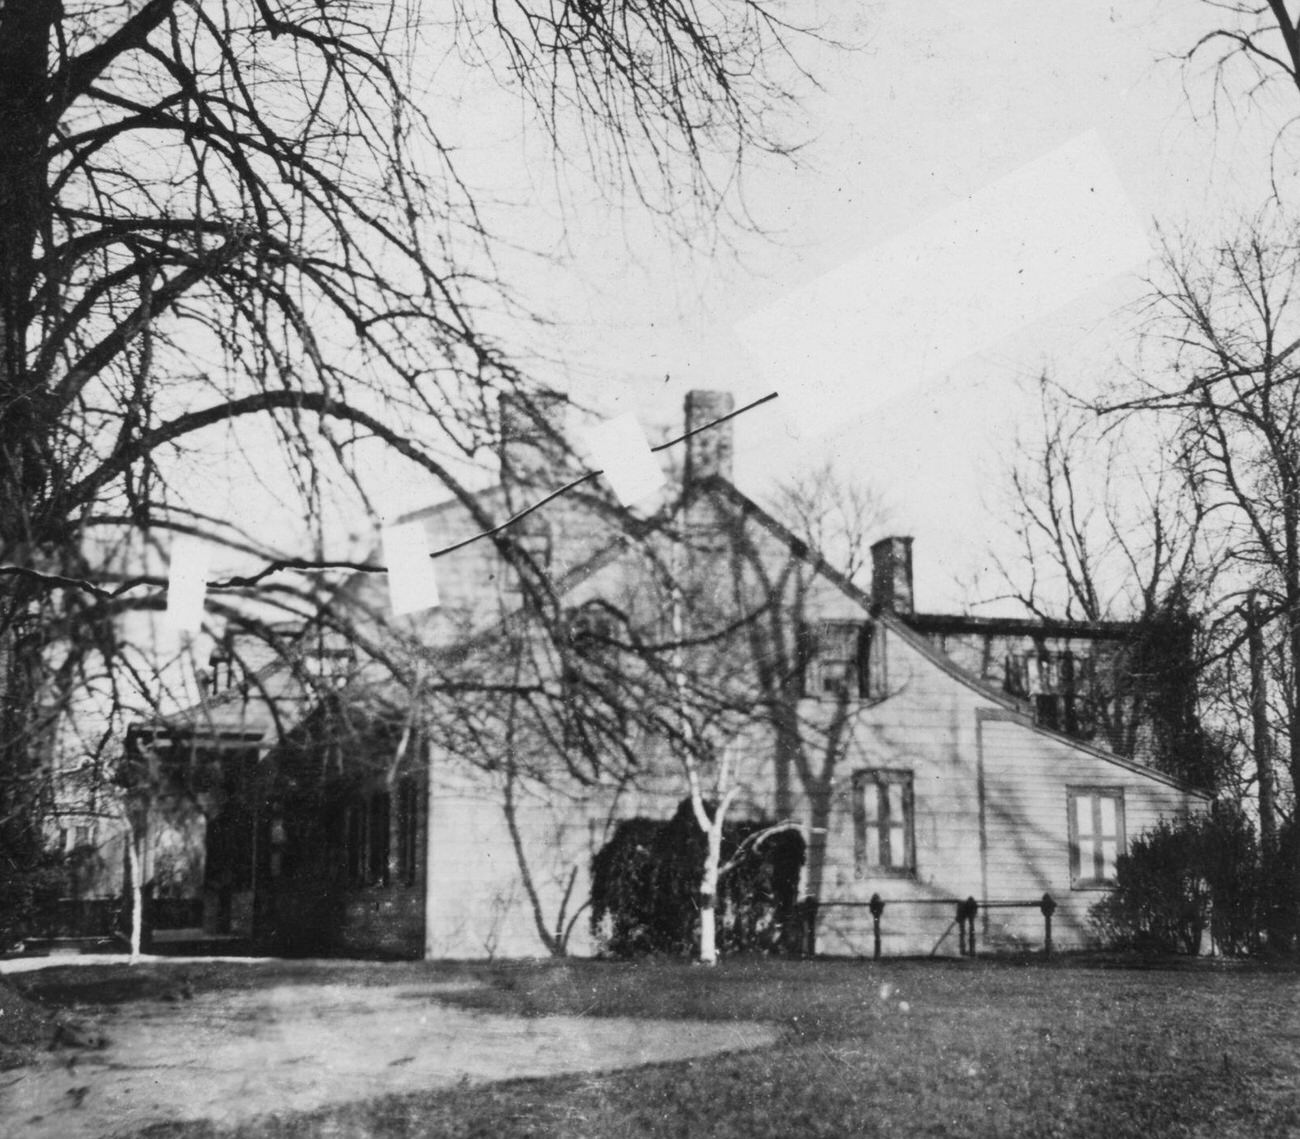 Formerly Located At 563 Flatbush Avenue, East Side, South Of Maple Street; Moved To Prospect Park In 1918